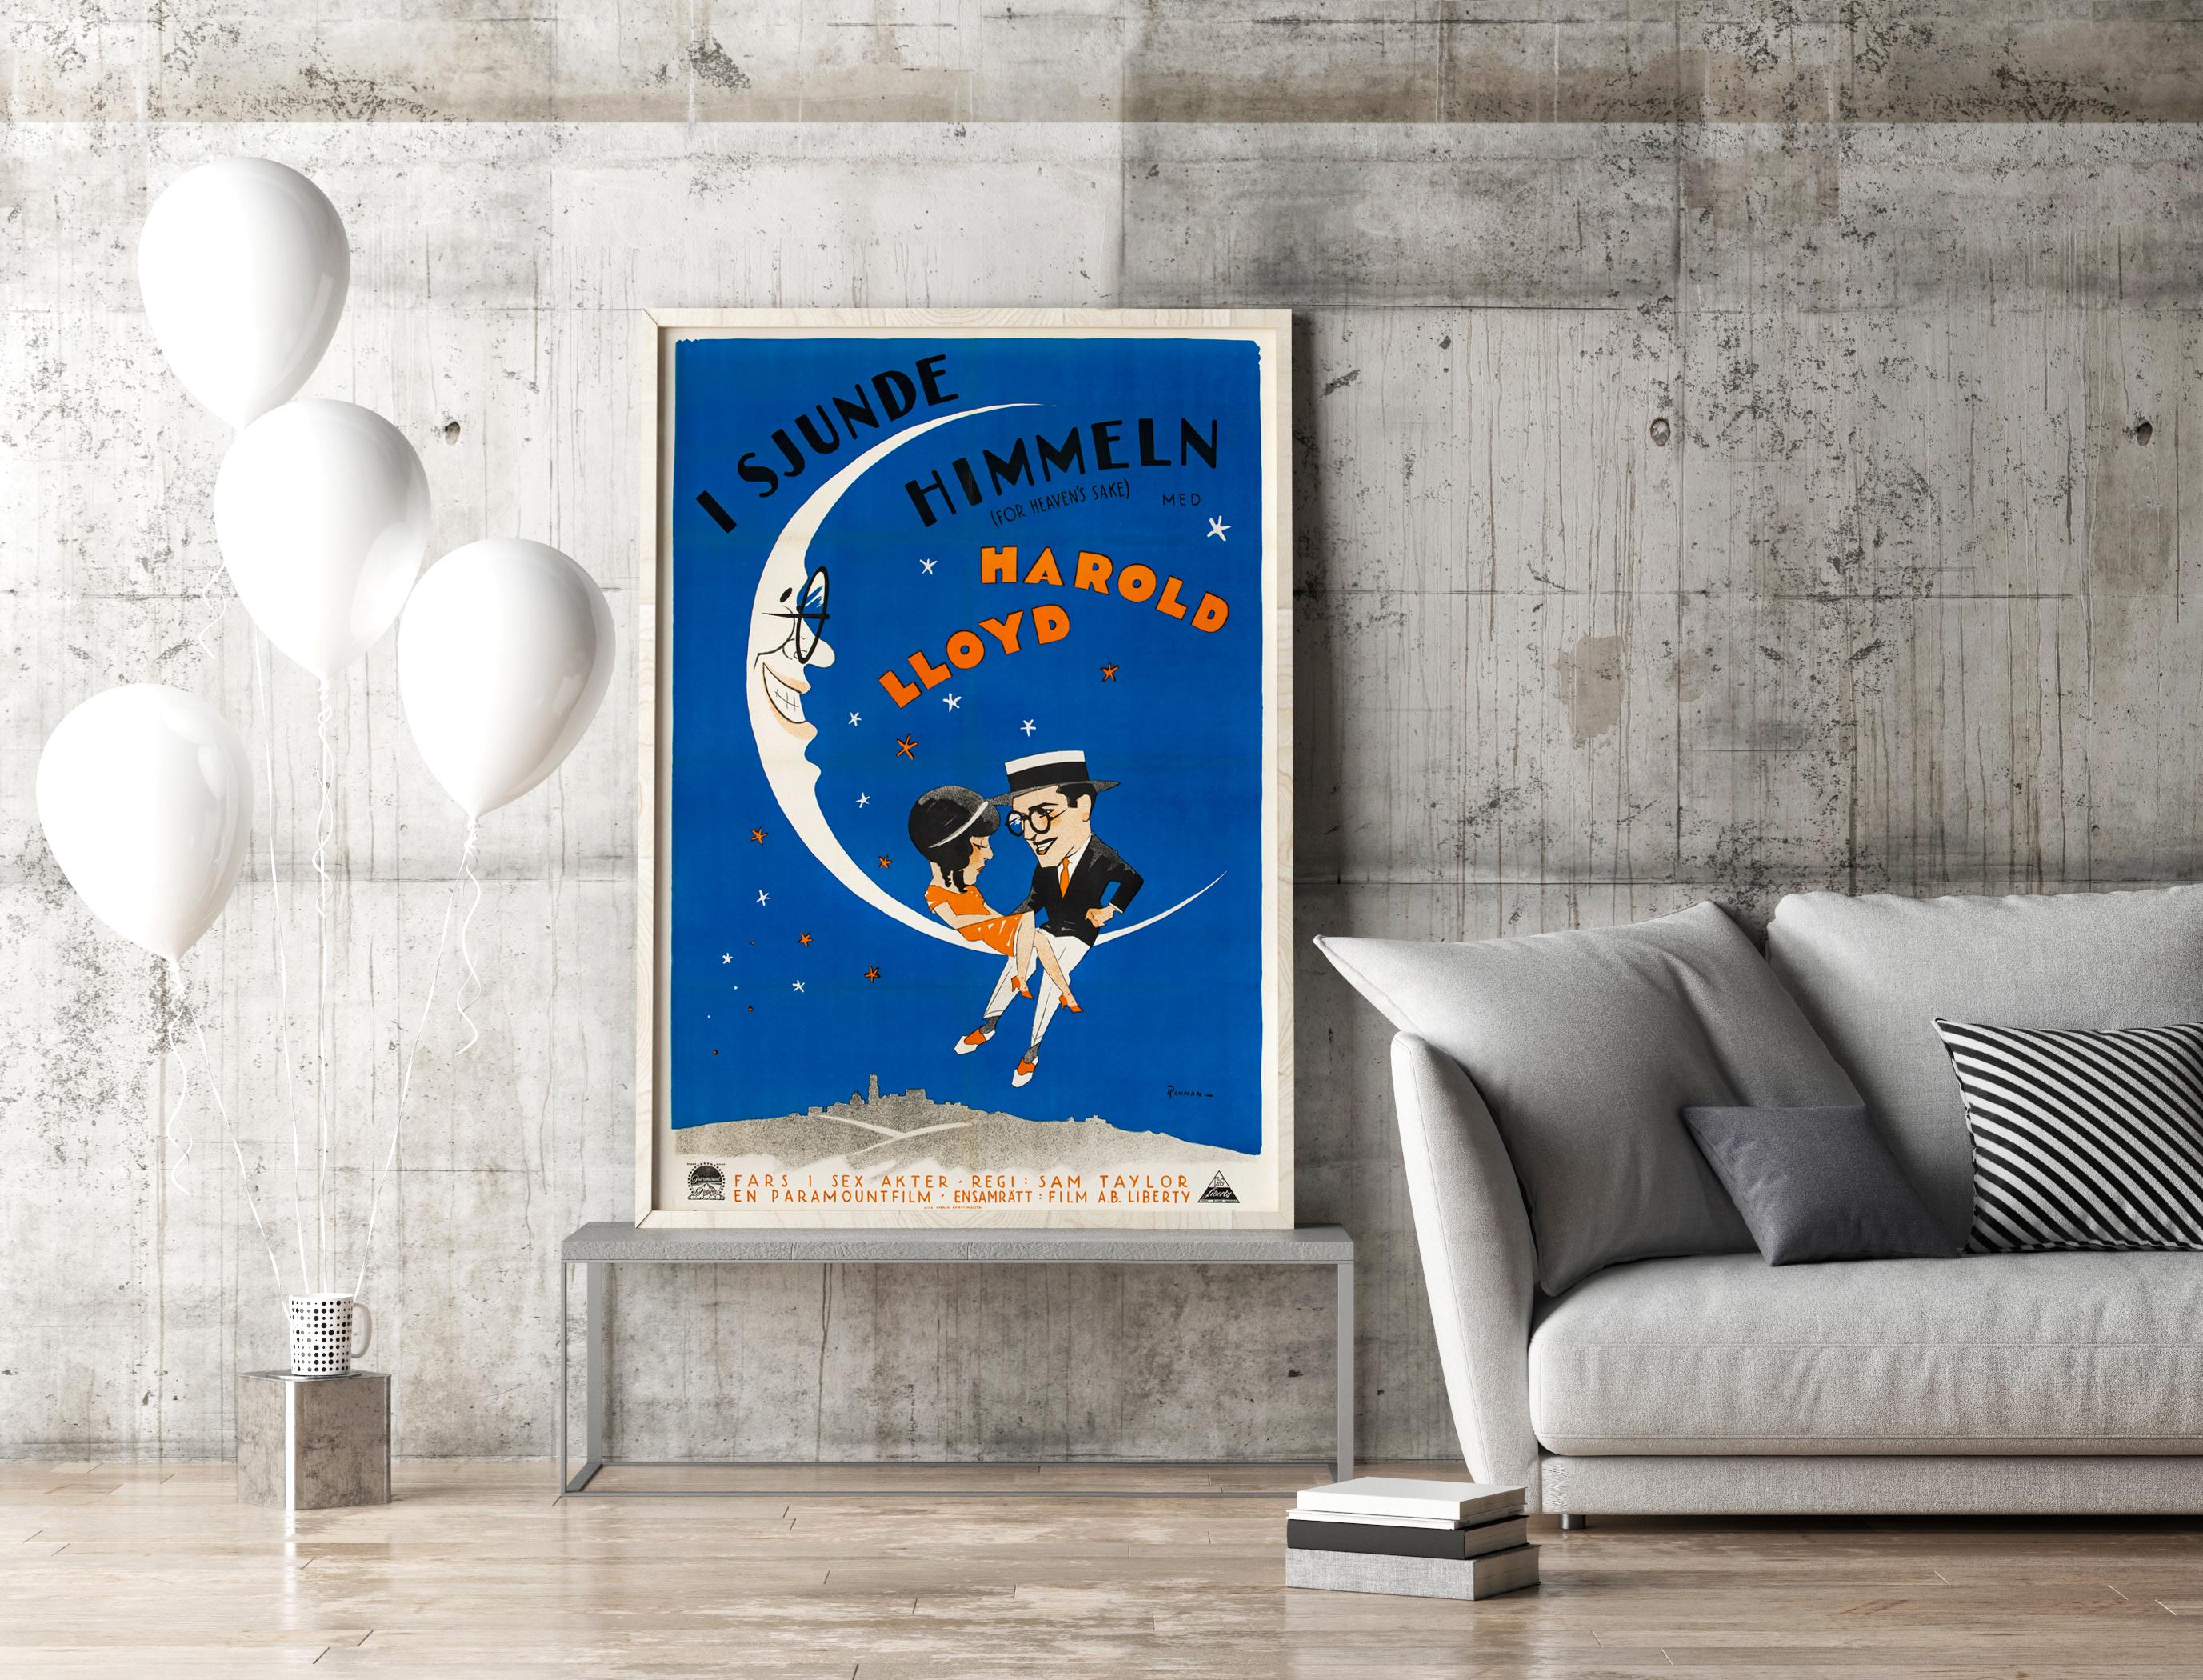 Art Deco 'For Heaven's Sake' Original Vintage Movie Poster by Eric Rohman, Swedish, 1926 For Sale